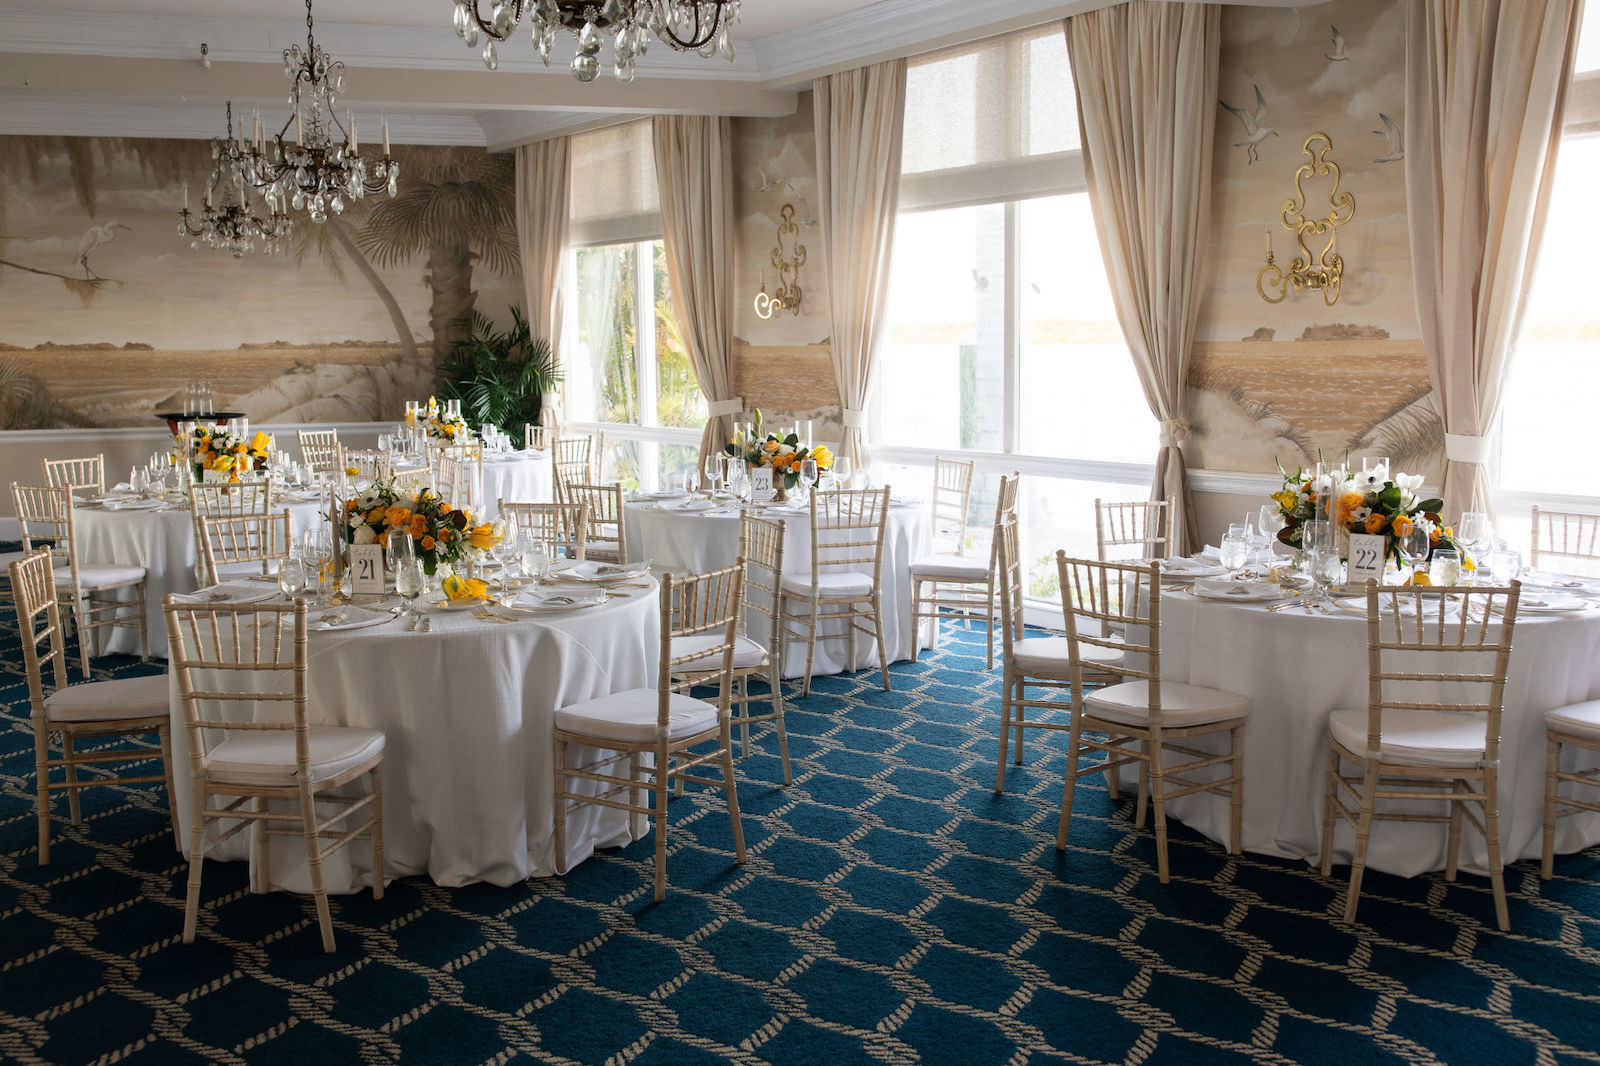 Elegant Nautical Ballroom Wedding Reception Decor, Round Tables with White Linens, Gold Chiavari Chairs, Low Centerpieces, Yellow and Greenery Florals | Tampa Bay Wedding Planner Parties A'la Carte | Clearwater Beach Wedding Venue Carlouel Yacht Club